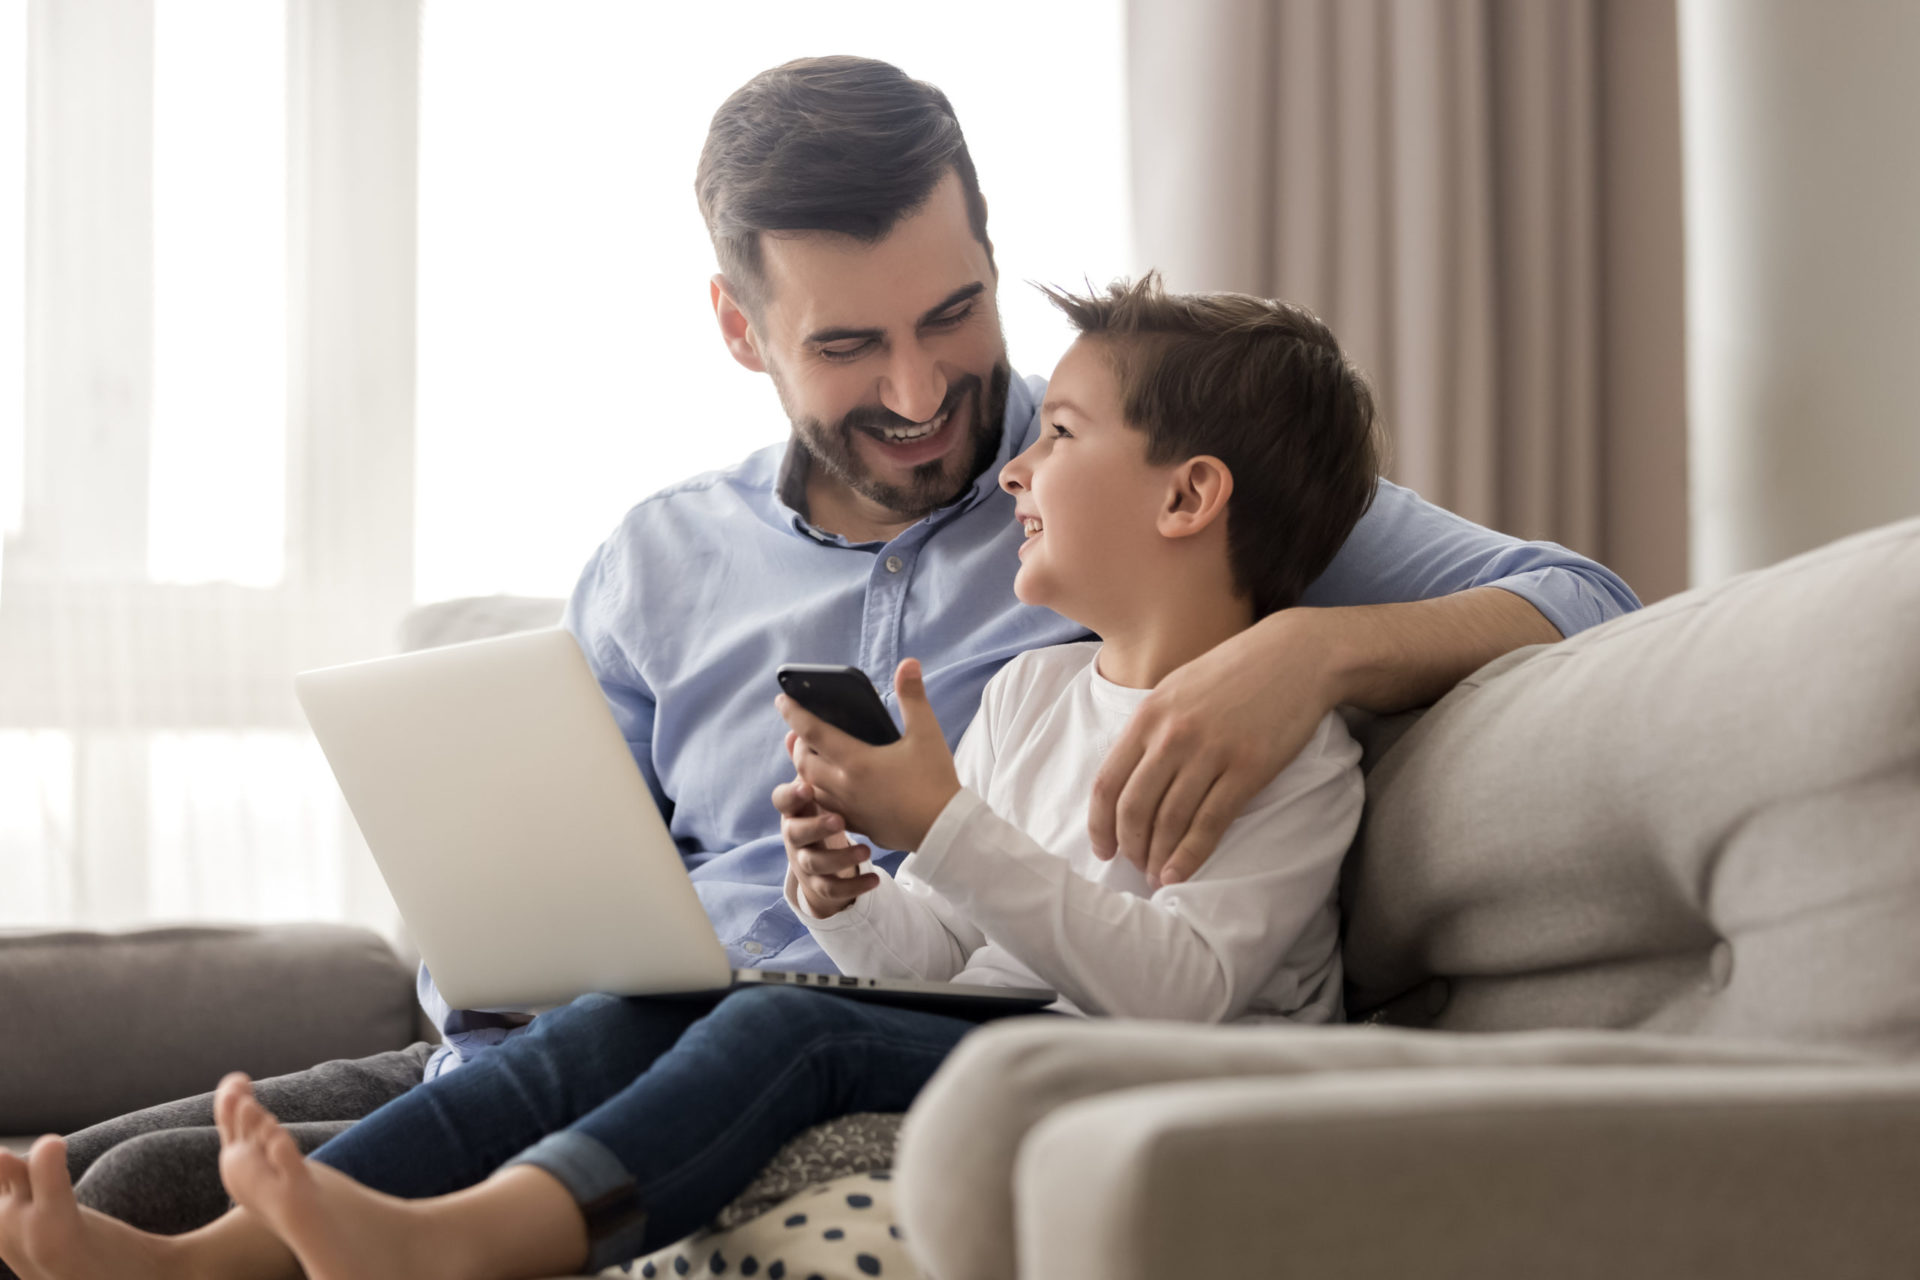 Adult and child on couch using laptop and phone